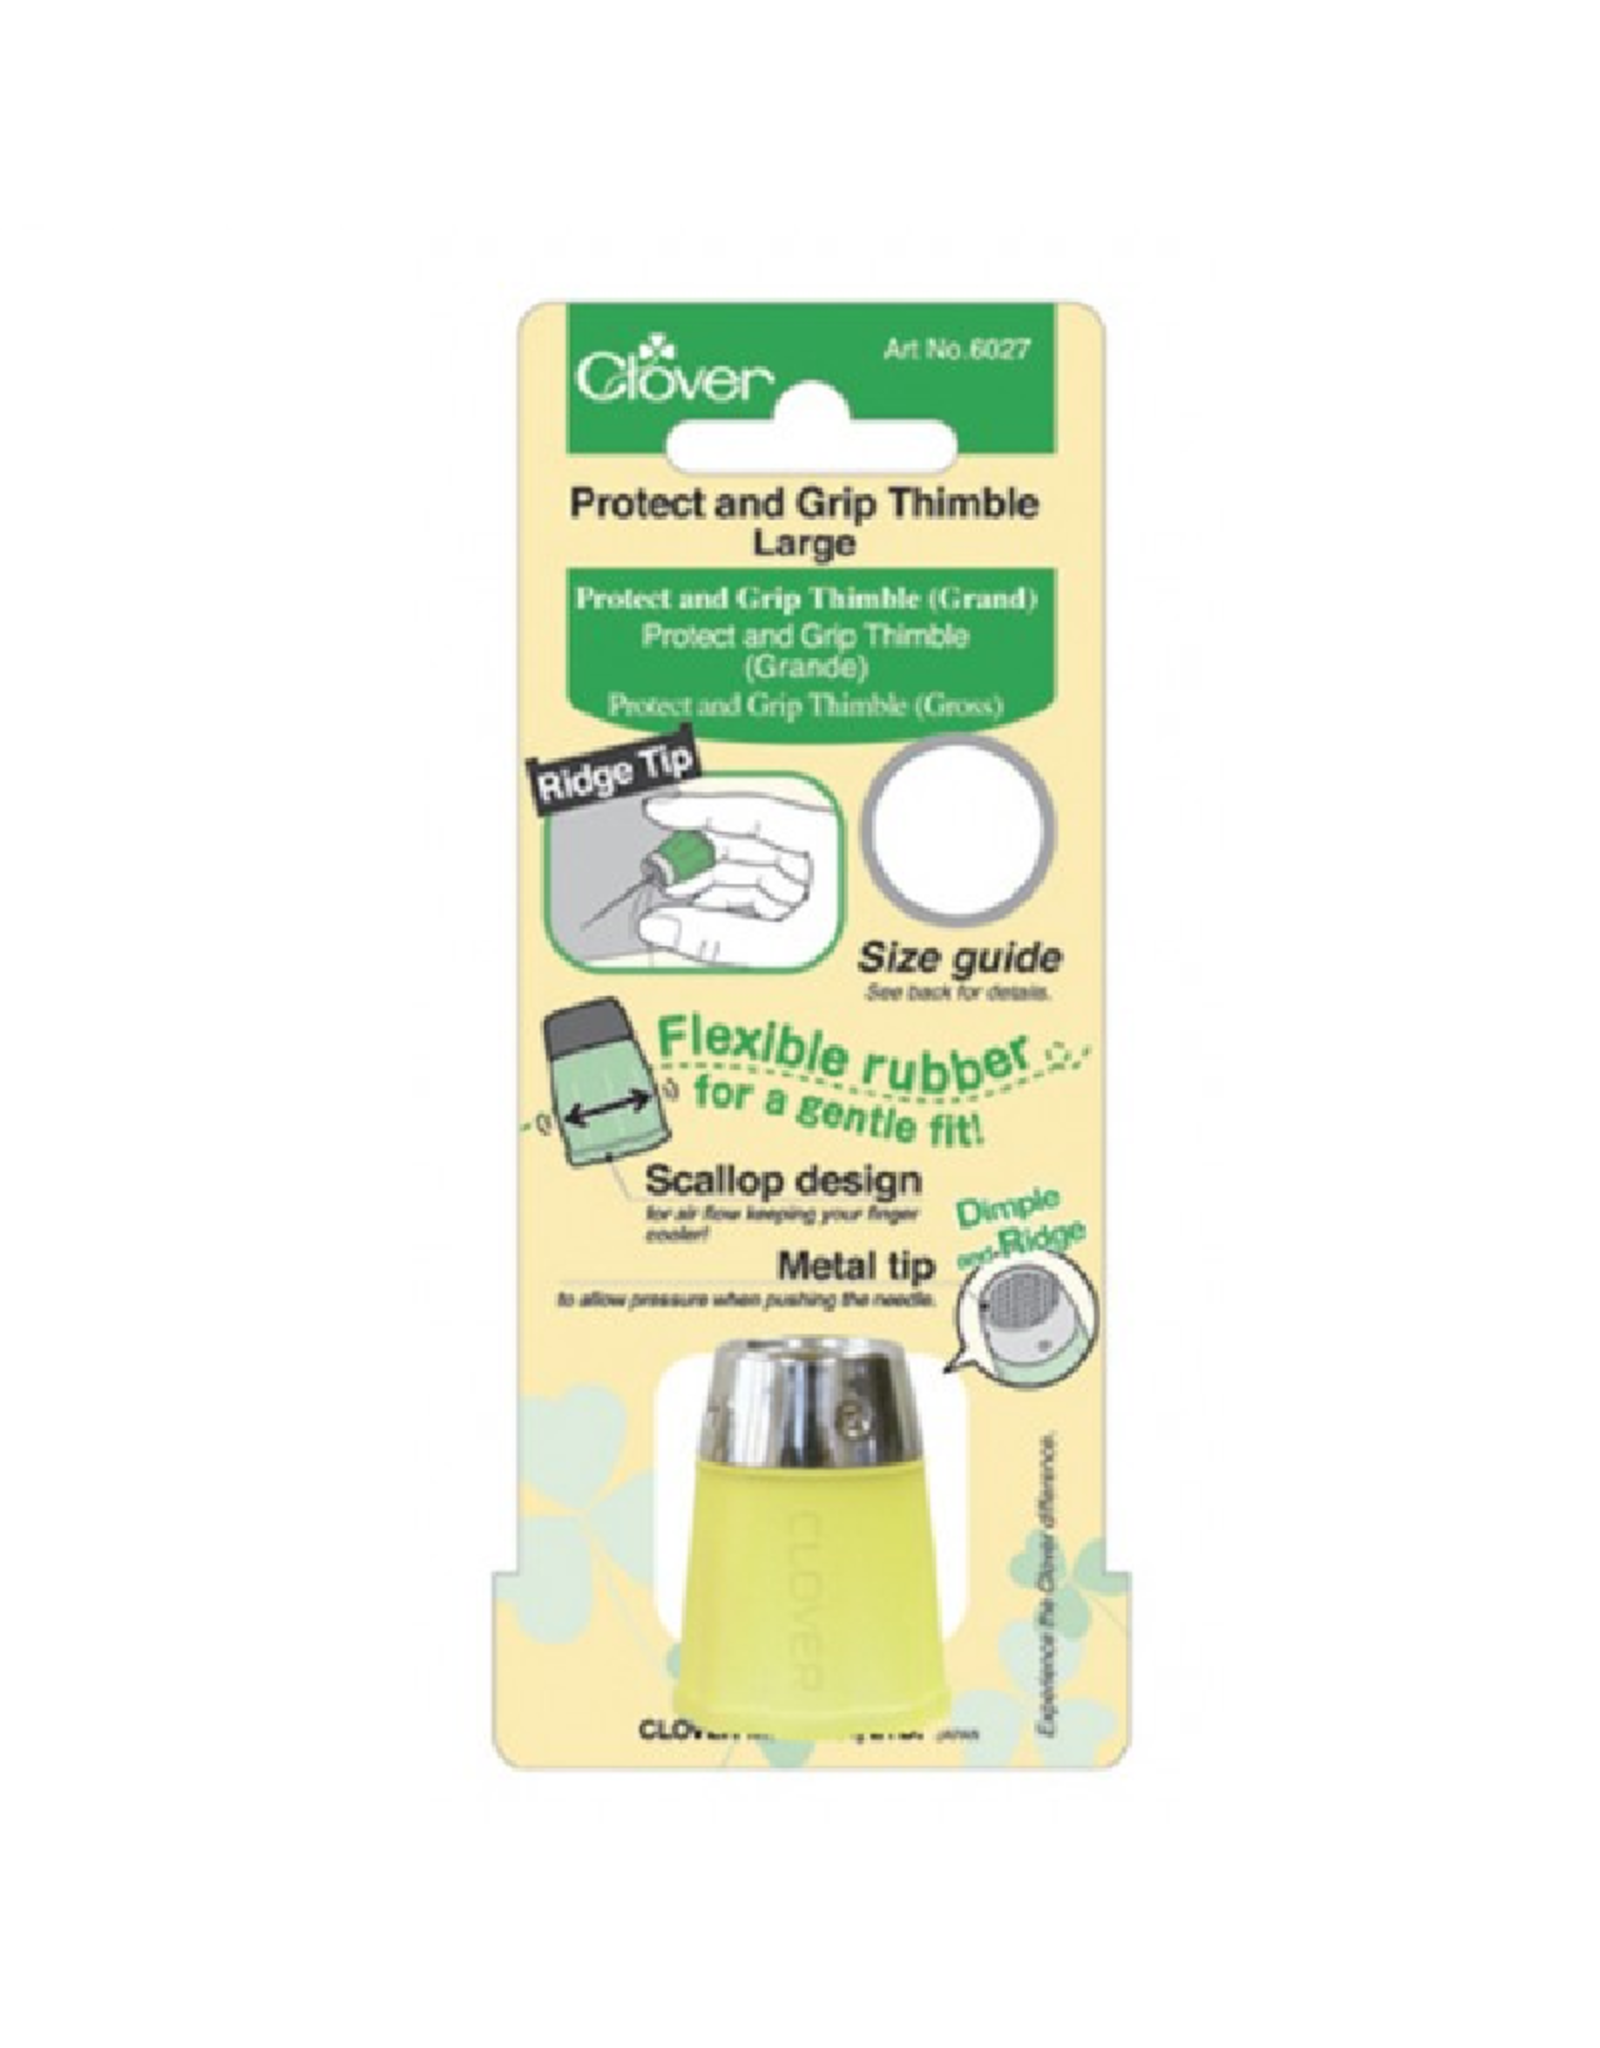 Clover Protect and Grip Thimble,  Large